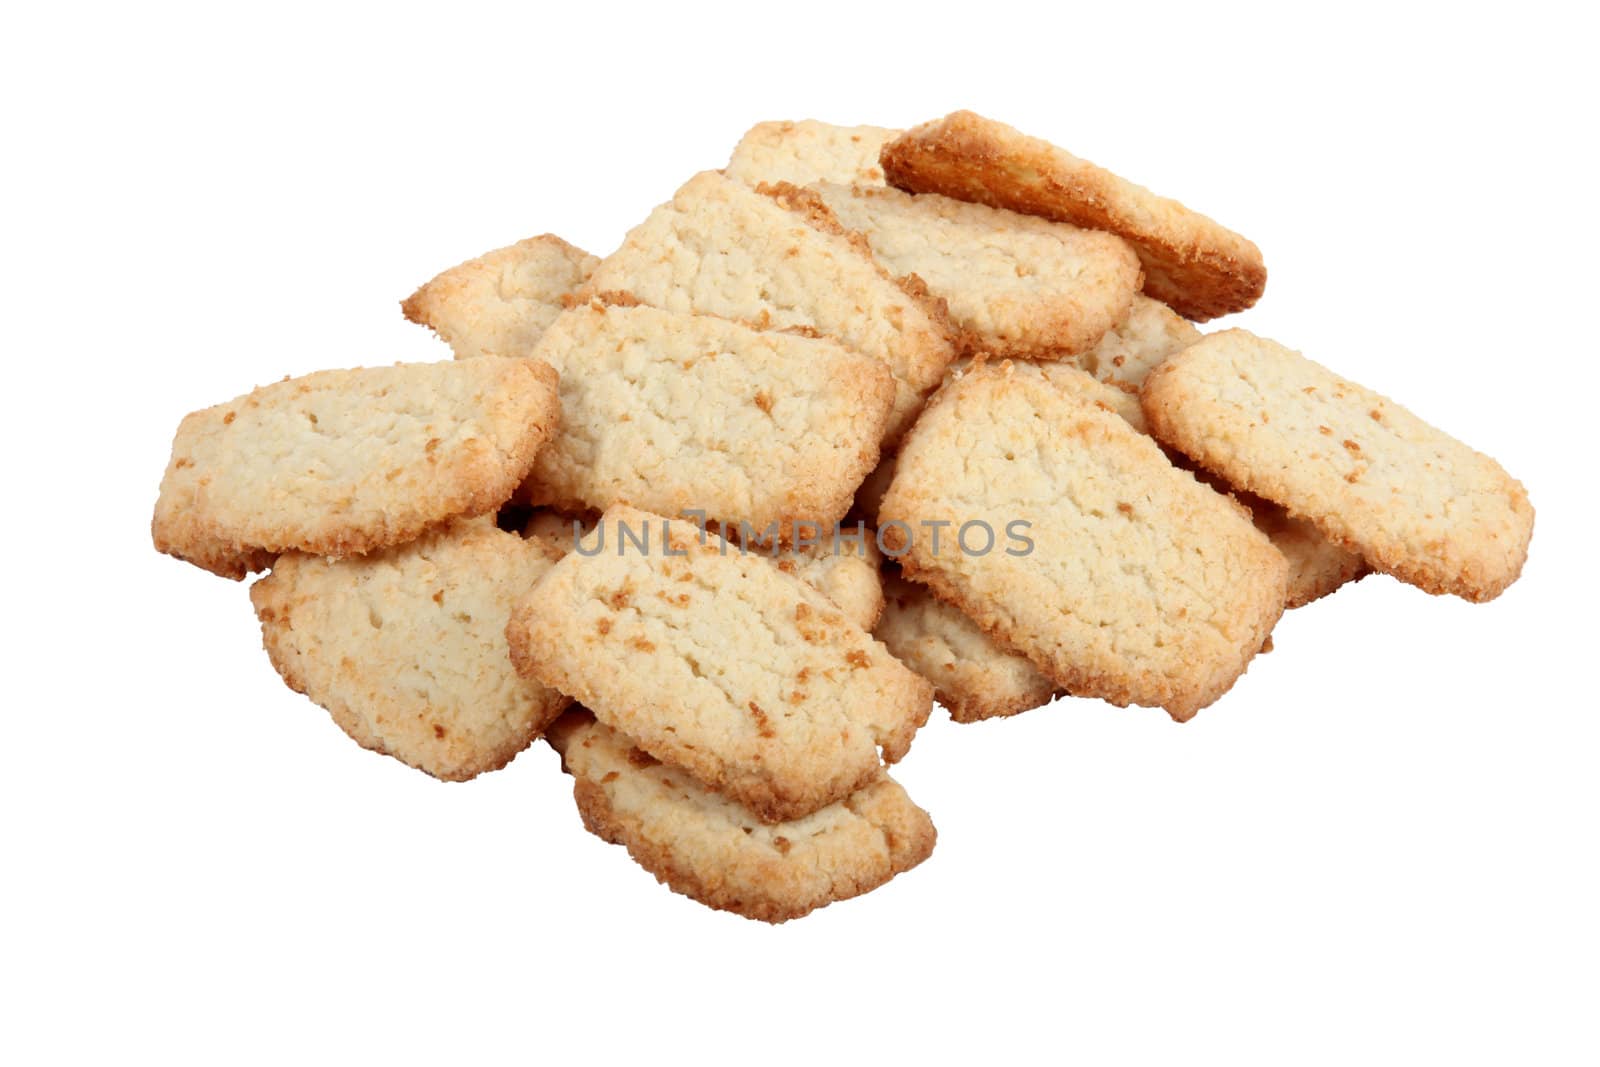 Pale biscuits